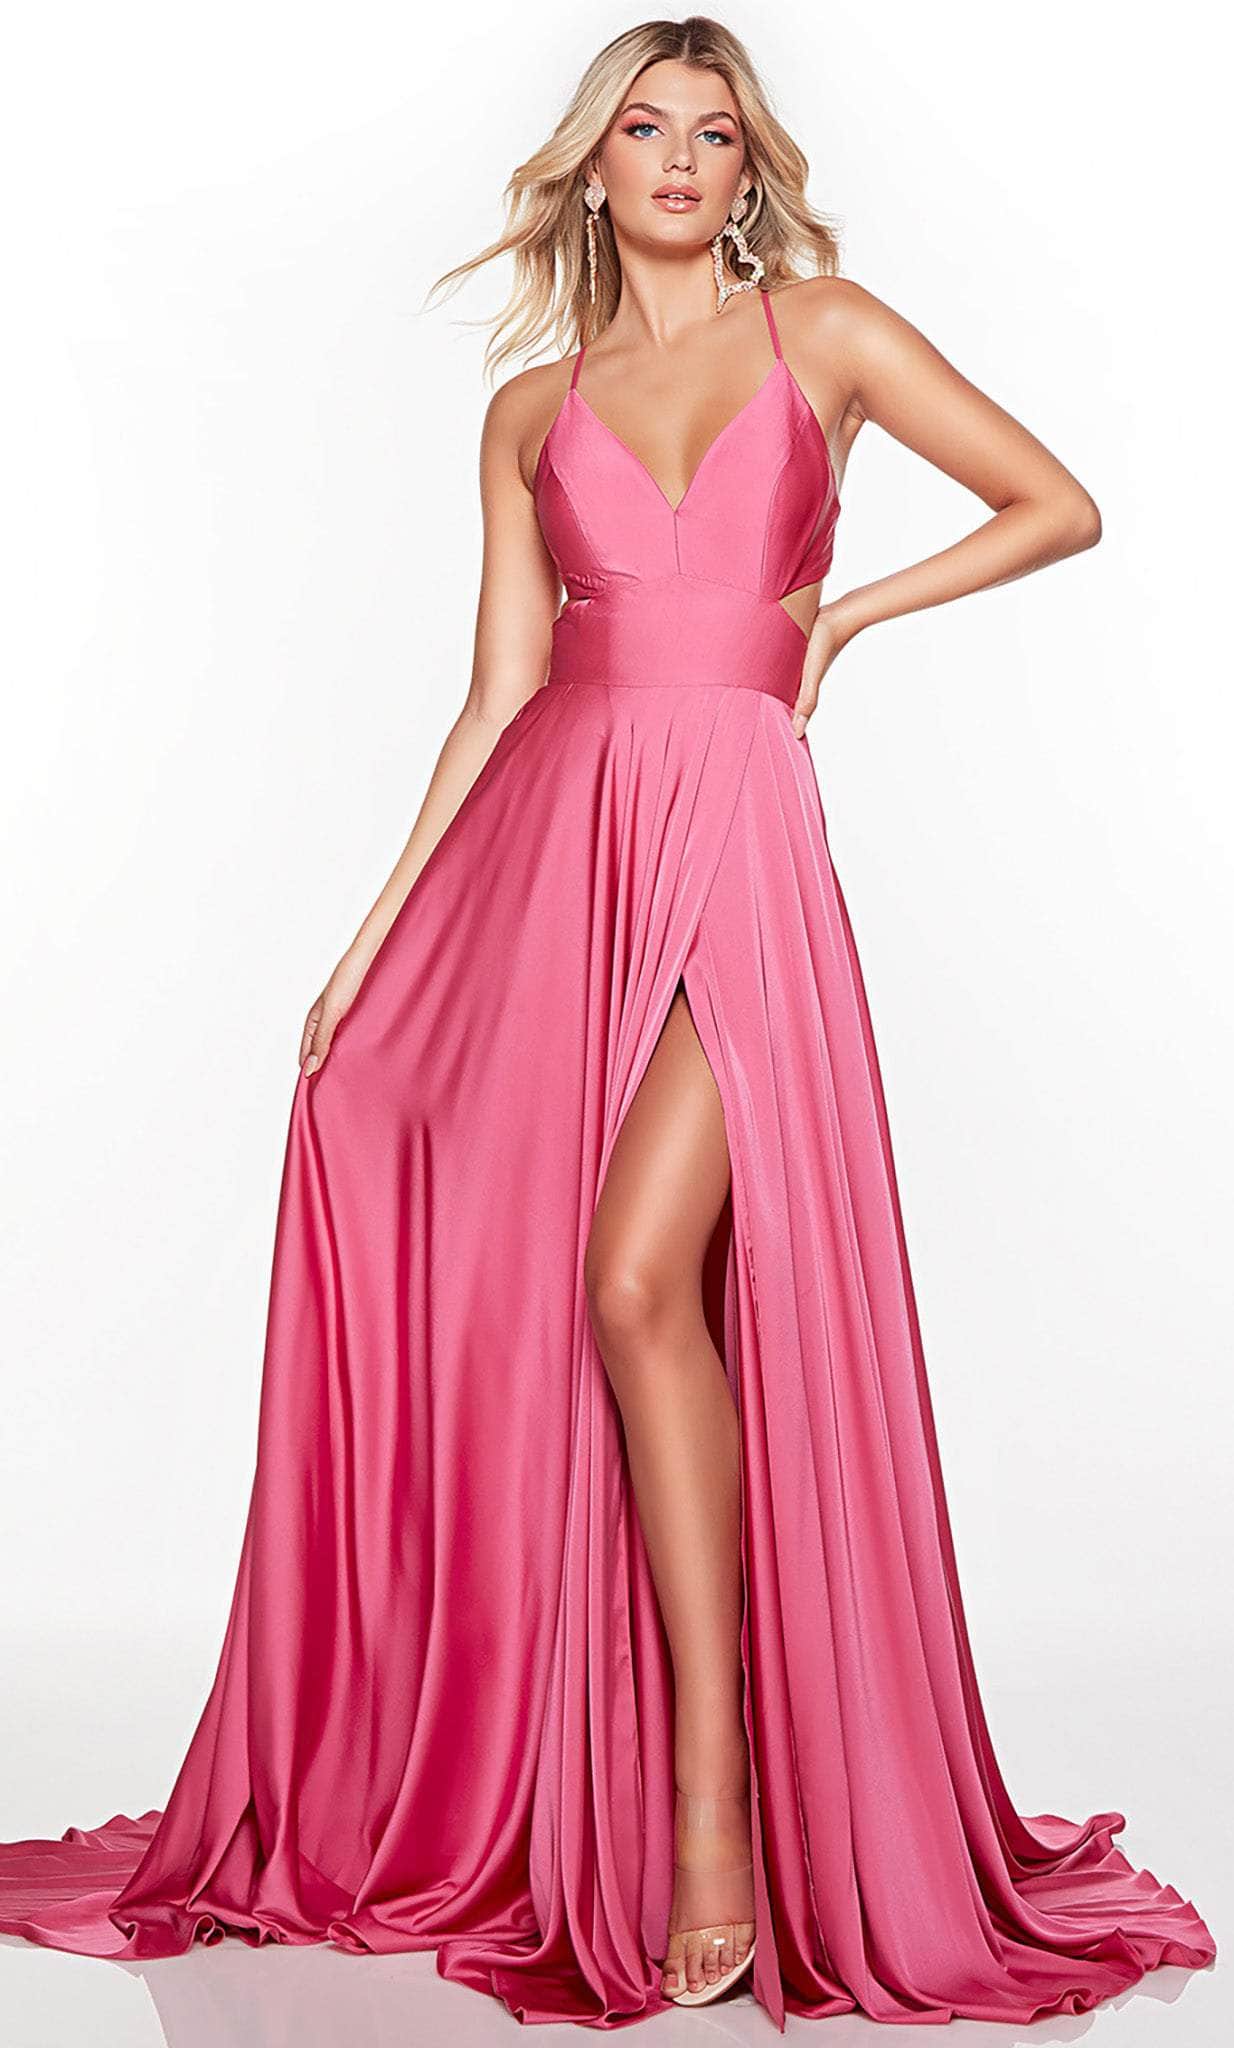 Image of Alyce Paris 61460 - Deep V-Neck Cutout Prom Gown